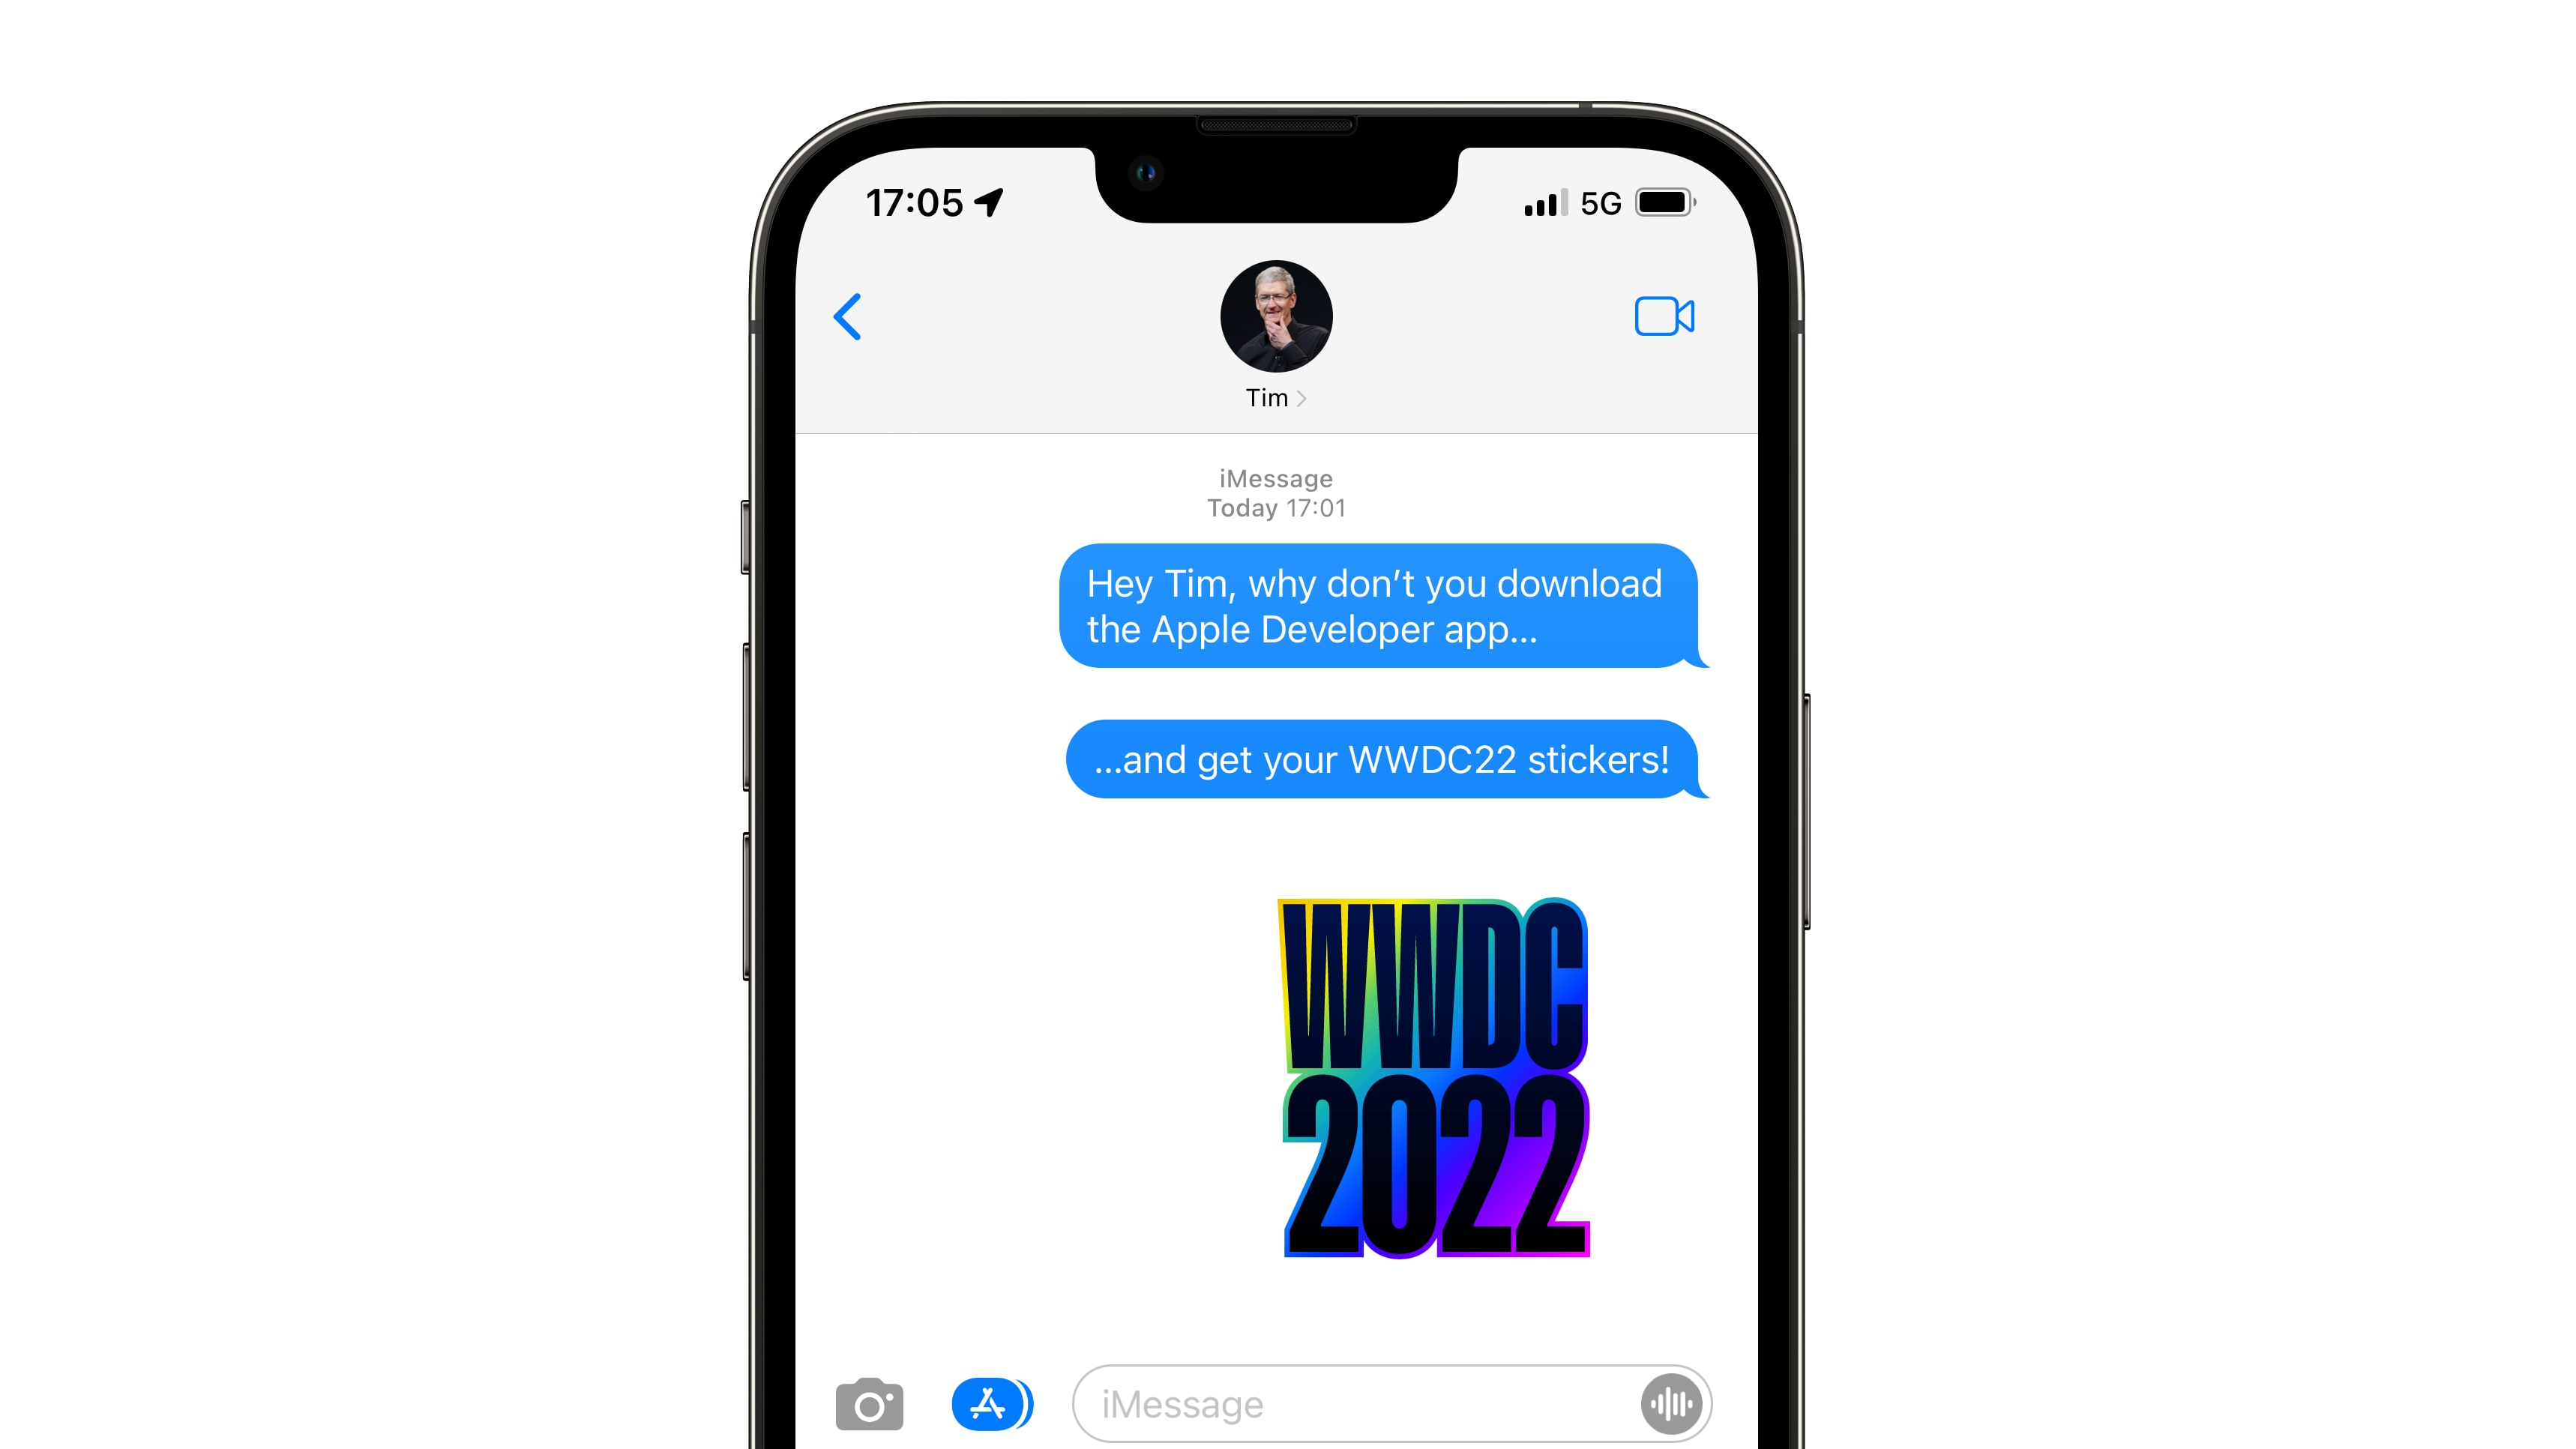 This example Messages screenshots depicts an imagined chat with Apple CEO Tim Cook to let him know he can get the official WWDC 2022 sticker pack for iMessage and FaceTime by downloading the Apple Developer app for iPhone and iPad